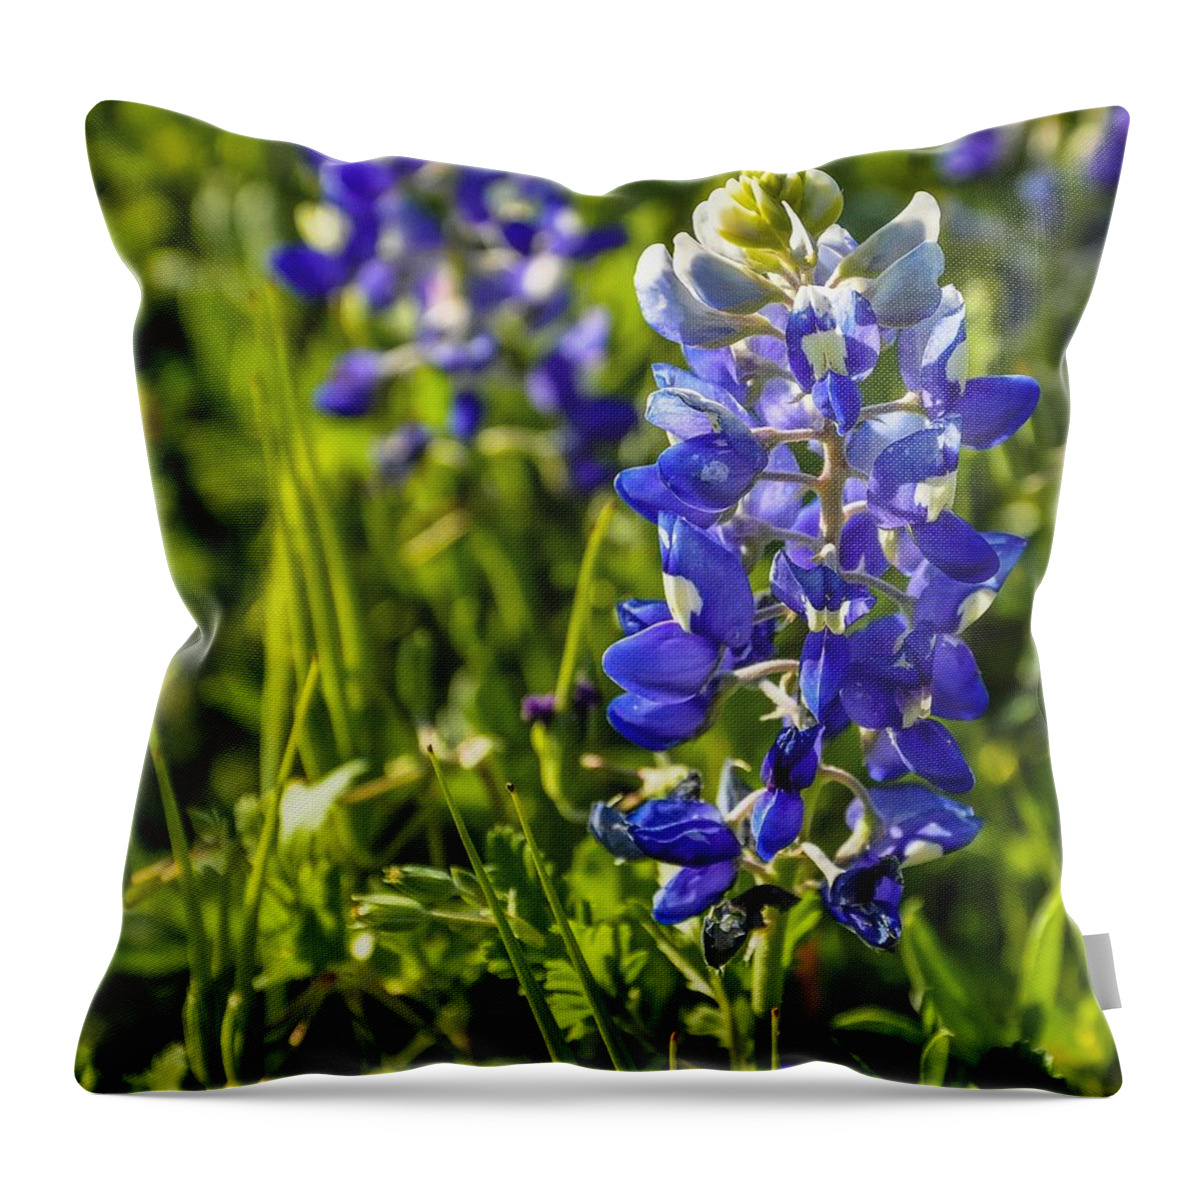 Bluebonnet Throw Pillow featuring the photograph Bluebonnet by Peggy Blackwell